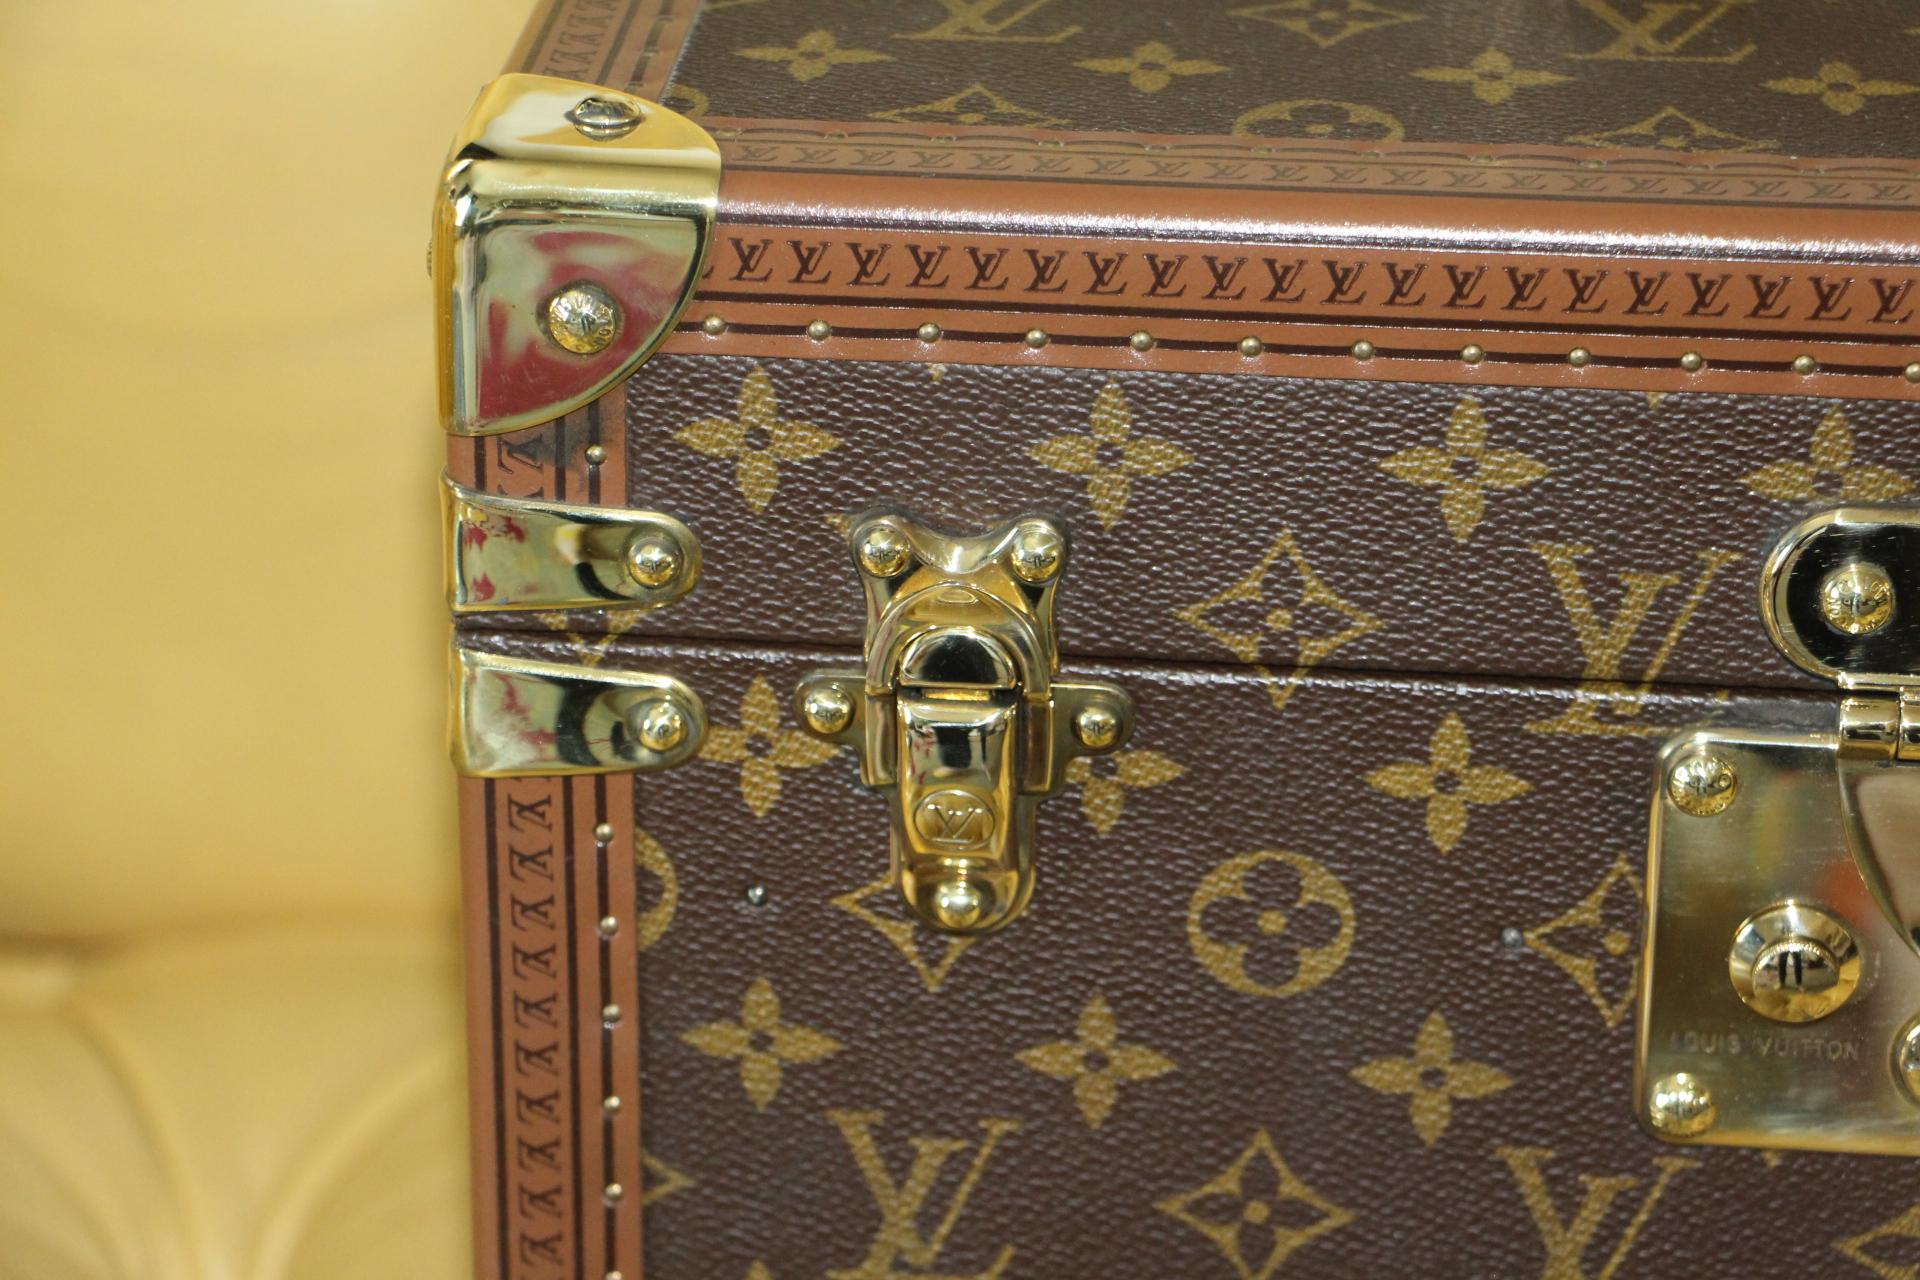 This beauty case features monogram canvas and all brass fittings.
All studs are marked Louis Vuitton as well as its leather handle.
Interior: Beige coated canvas, adjustable leather straps for holding materials. Very clean and fresh. Washable